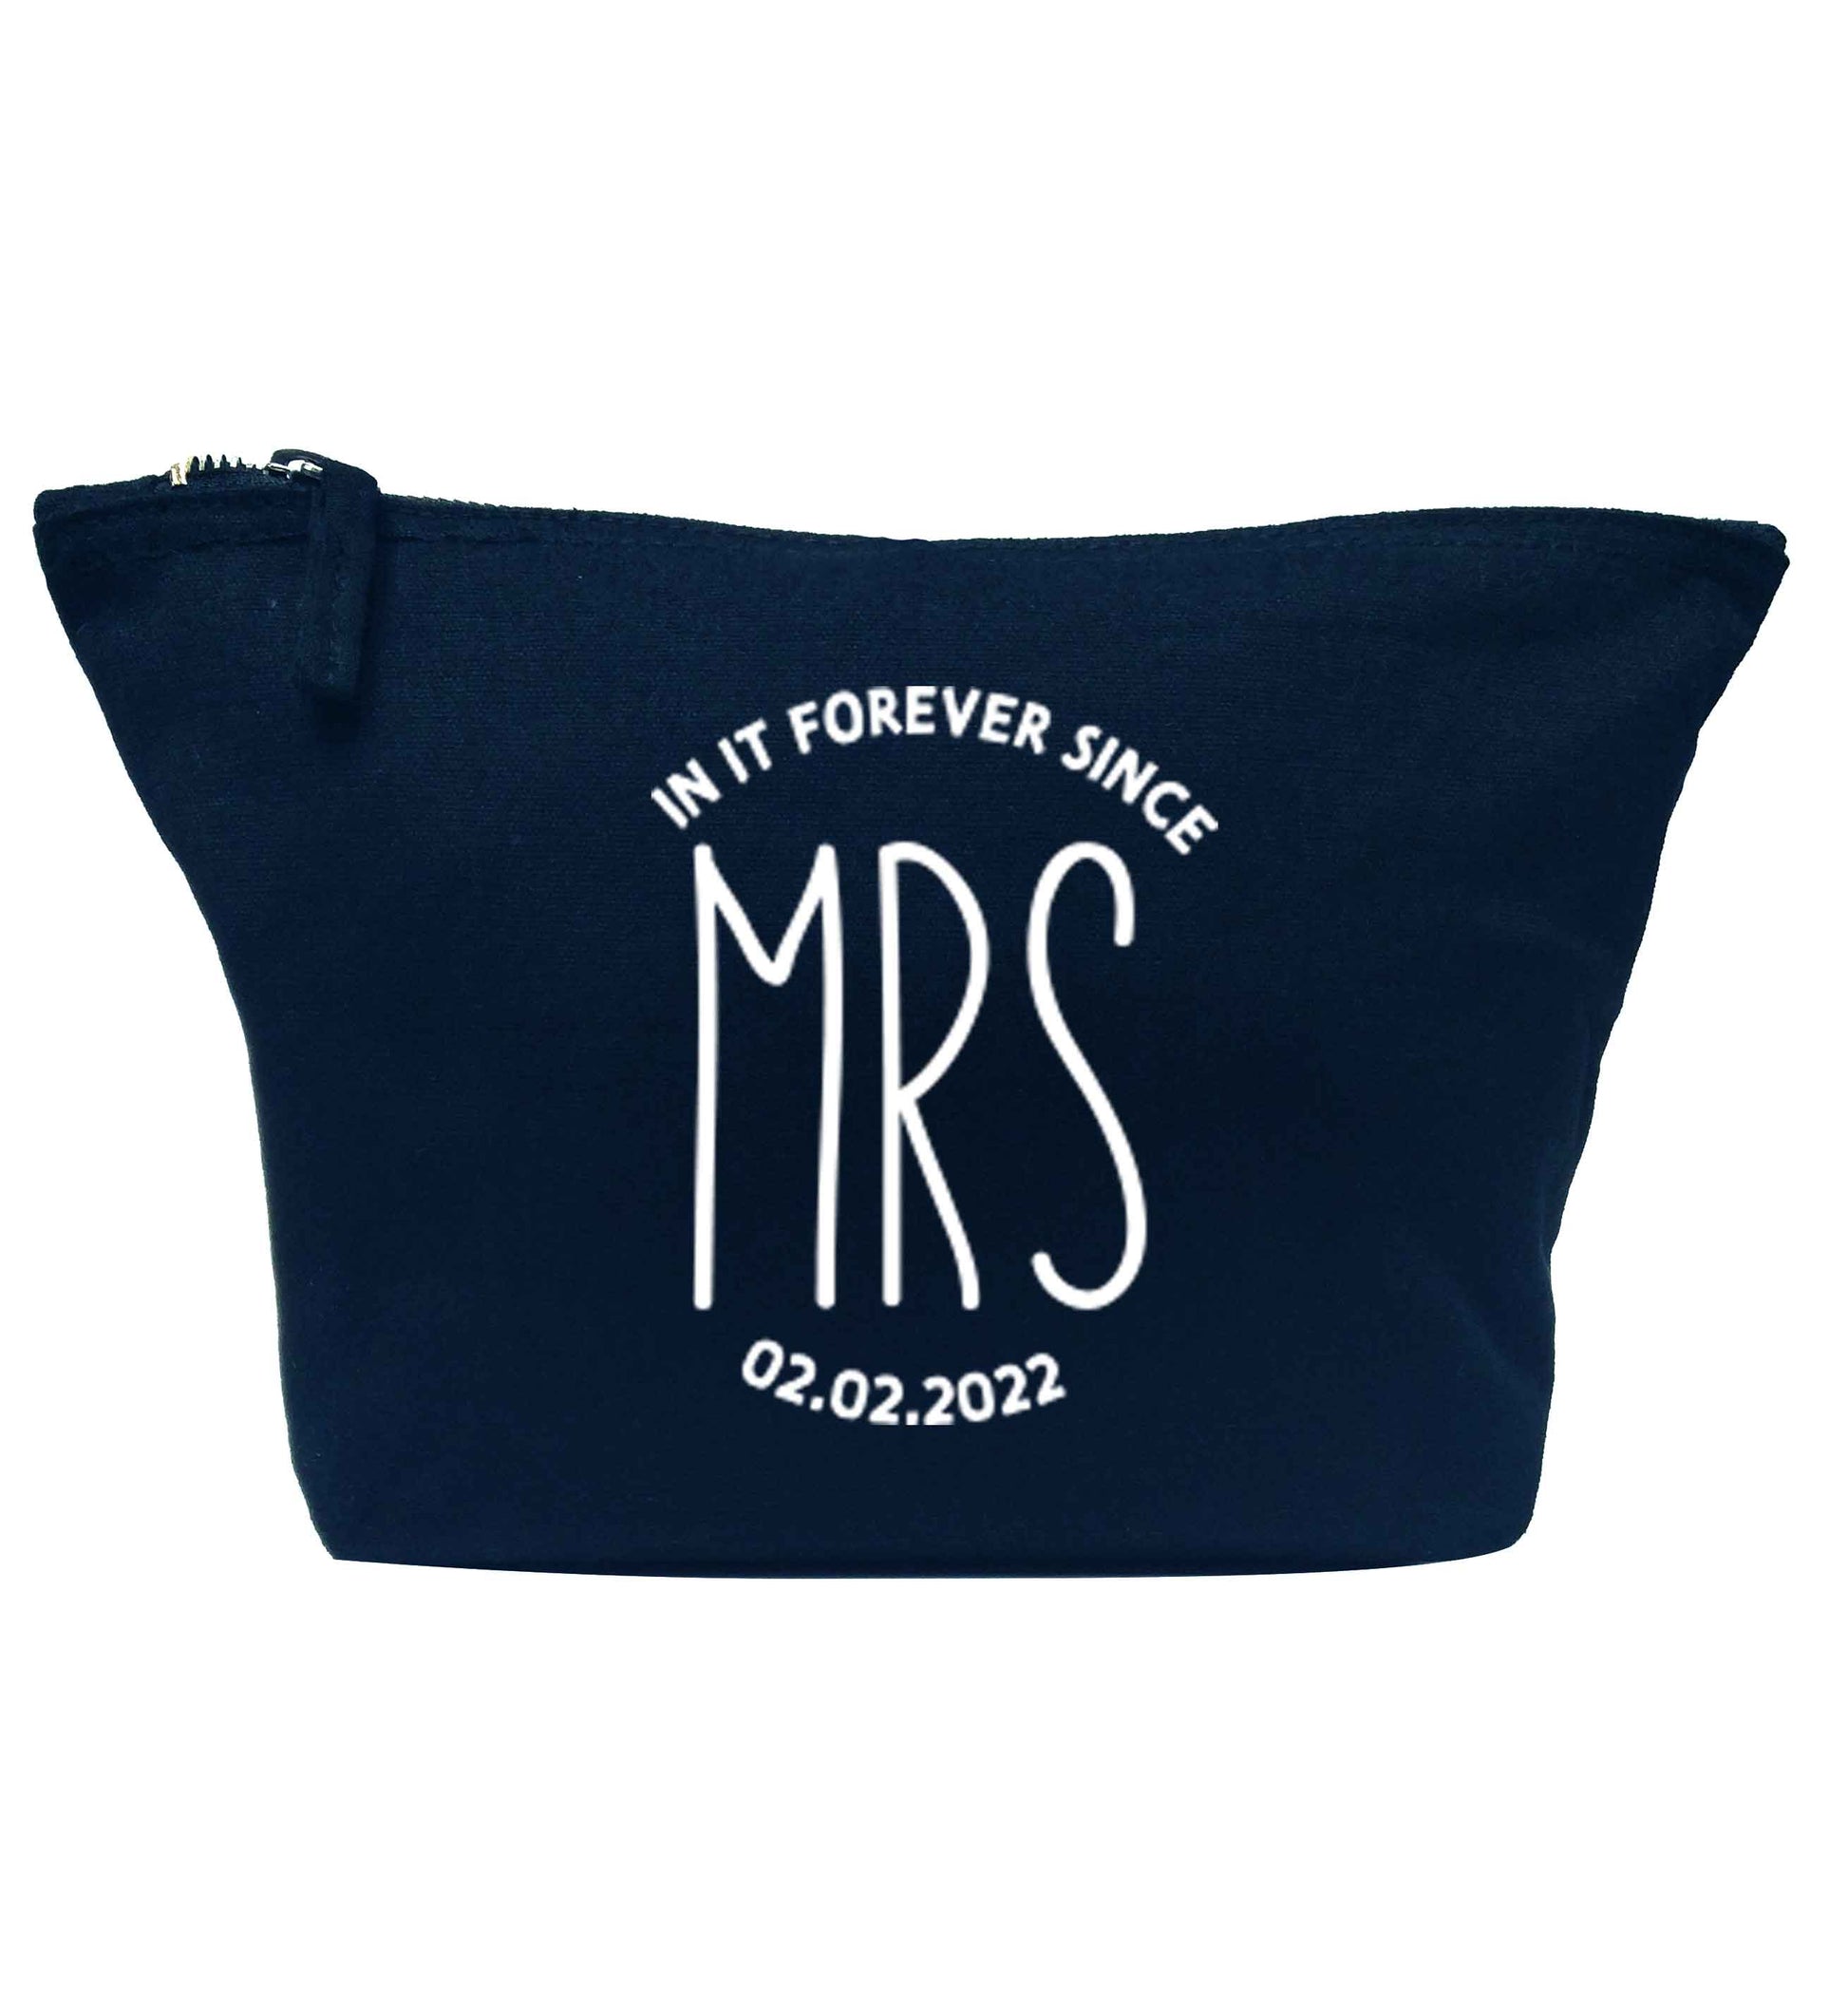 Funny matching gifts for him and her! Get matchy matchy, ideal for newlywed couples or a little valentines gift! navy makeup bag